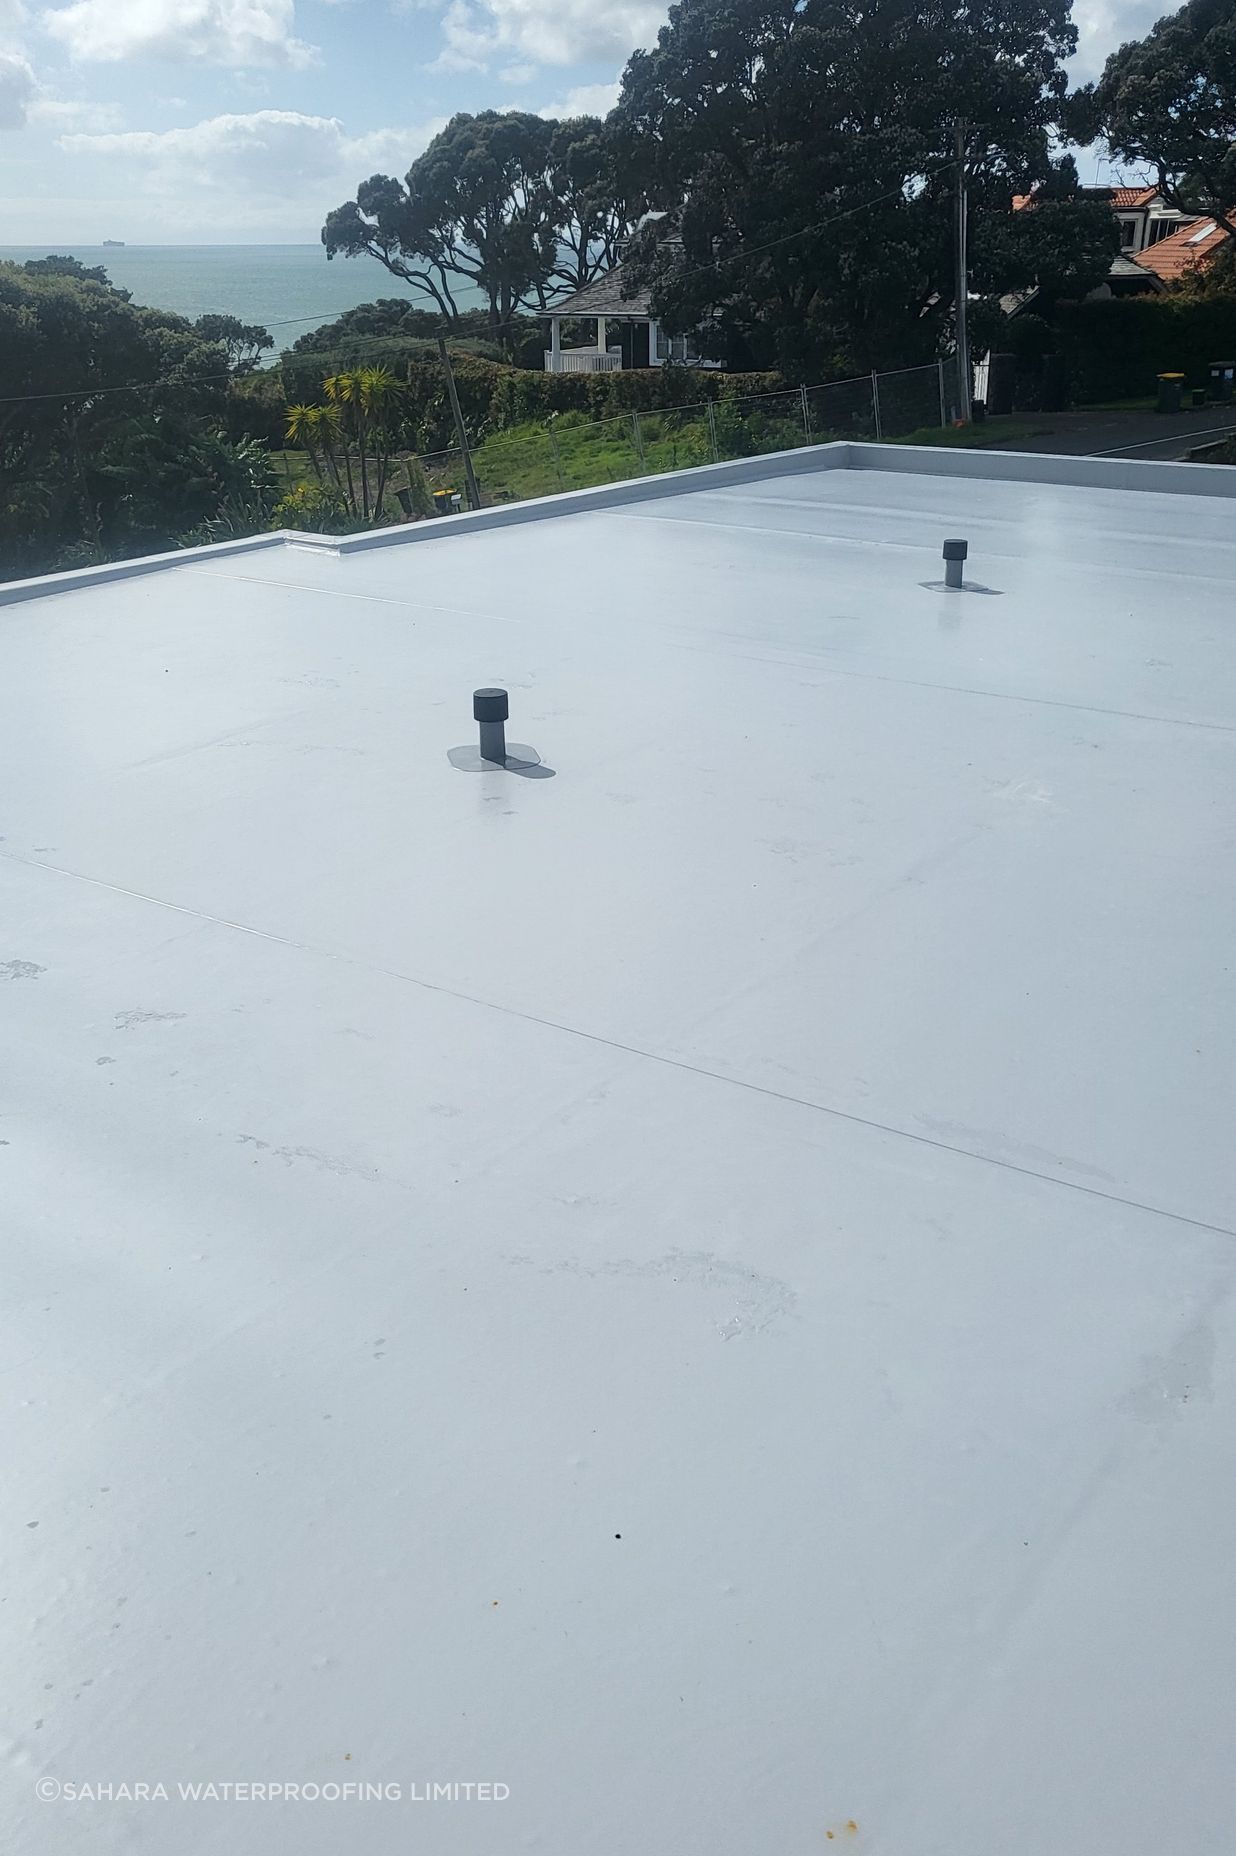  Residential waterproofing projects such as this can generally be achieved at a cost of $200 per sqm.